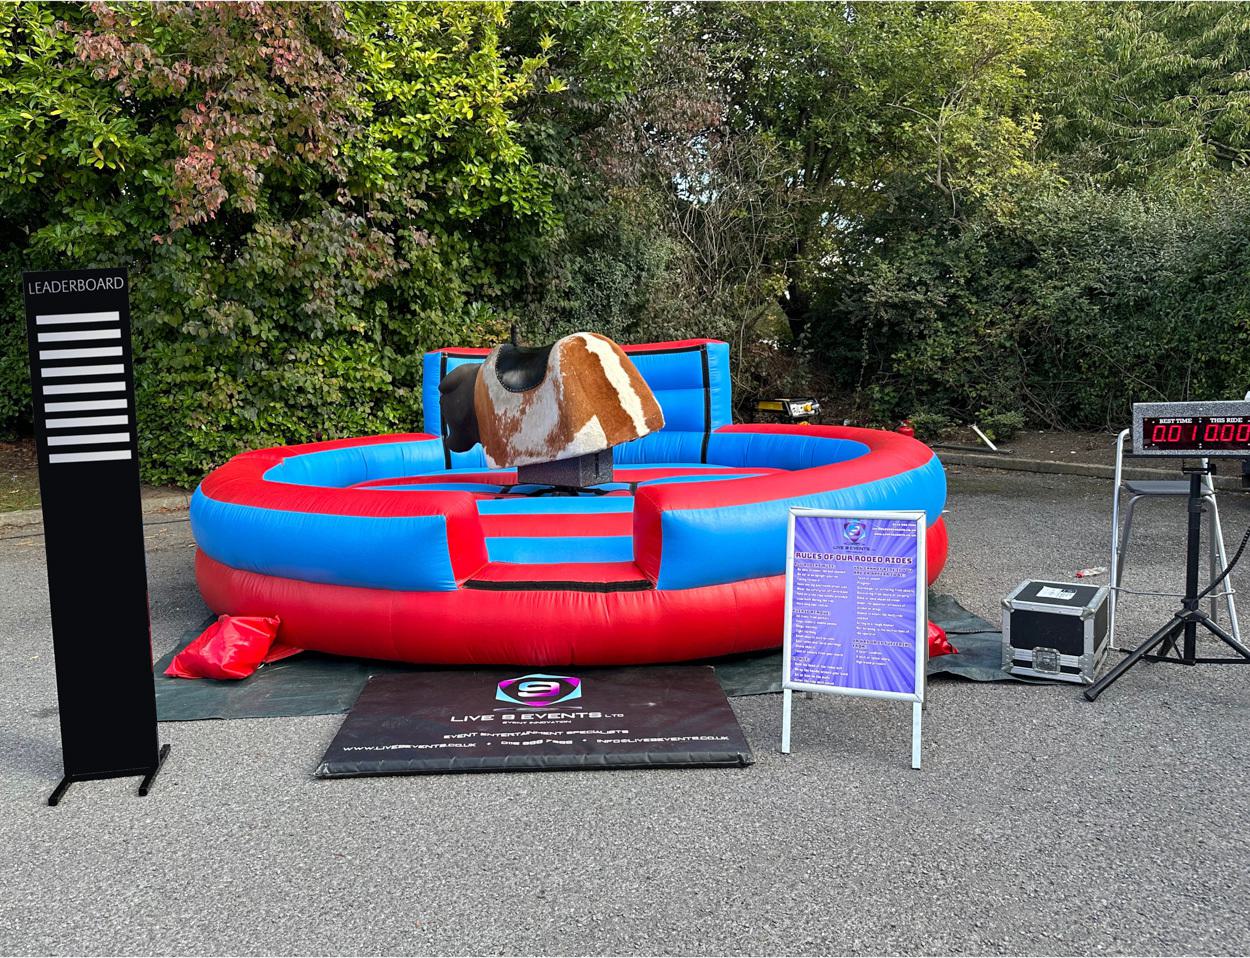 Mechanical Bull Hire with Leader Board